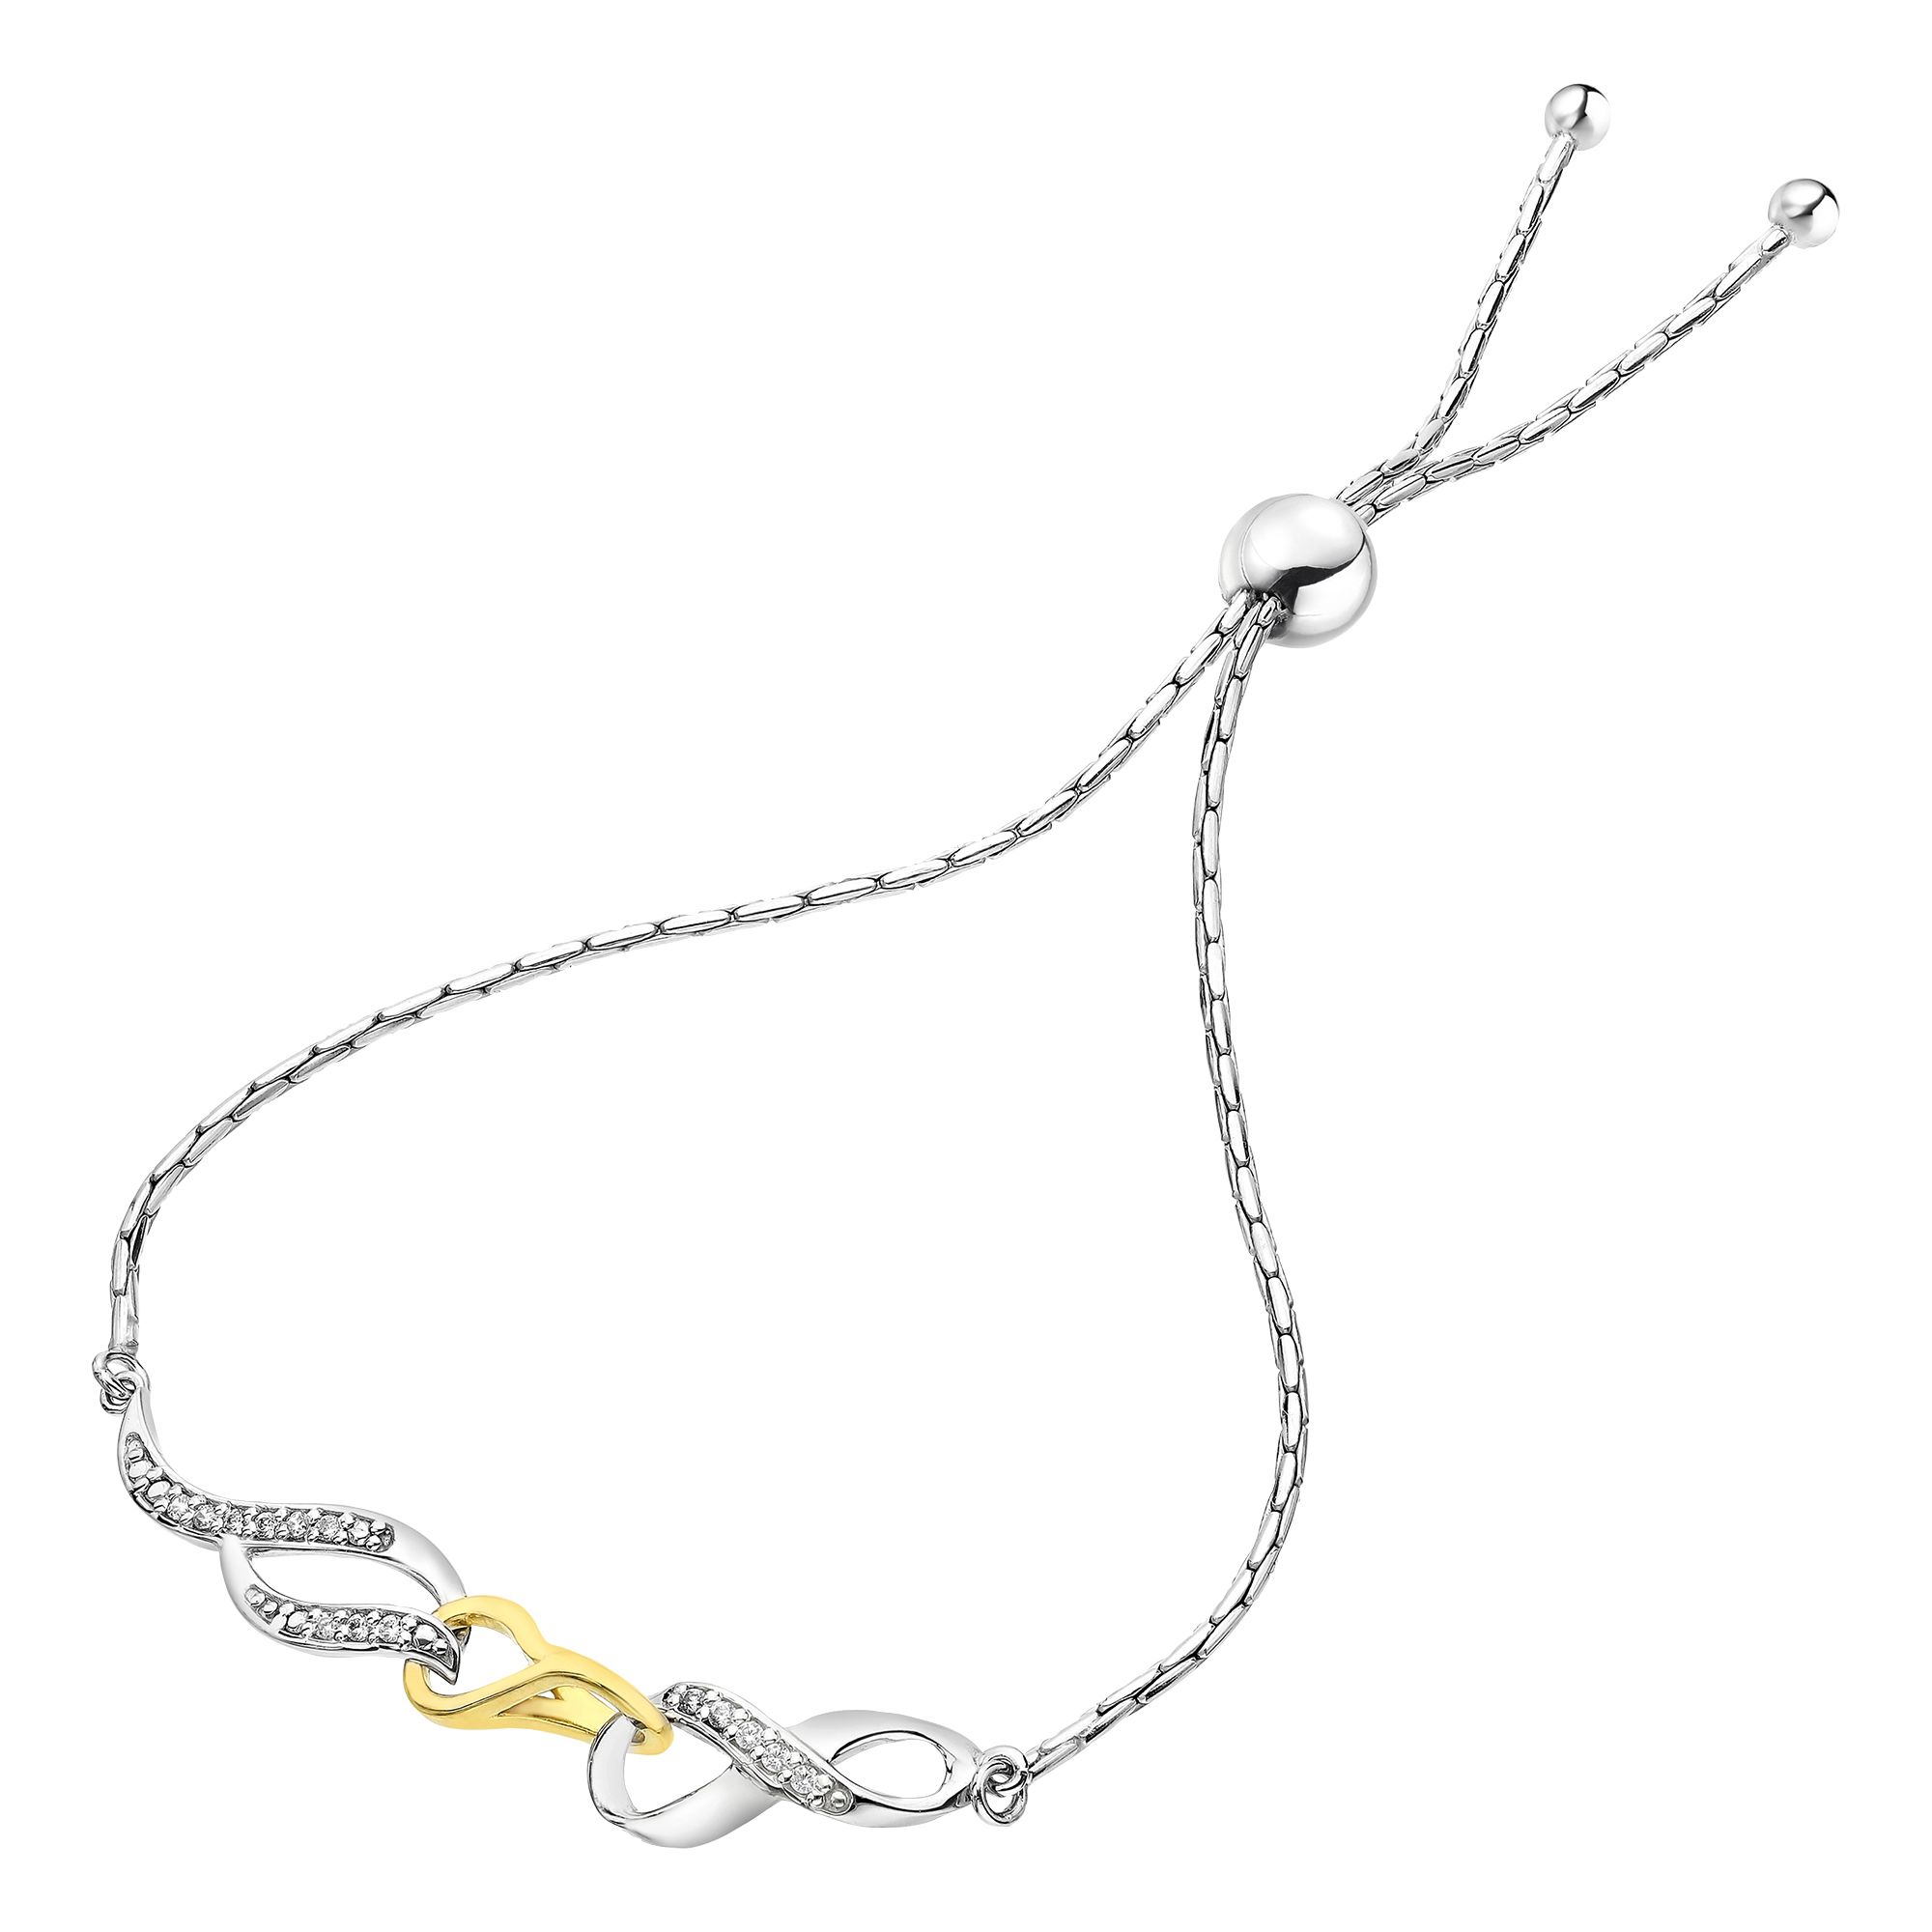 Amairah .10 ct. t.w. Diamond Bolo Bracelet in Yellow Gold Plated over Silver Infinity Style